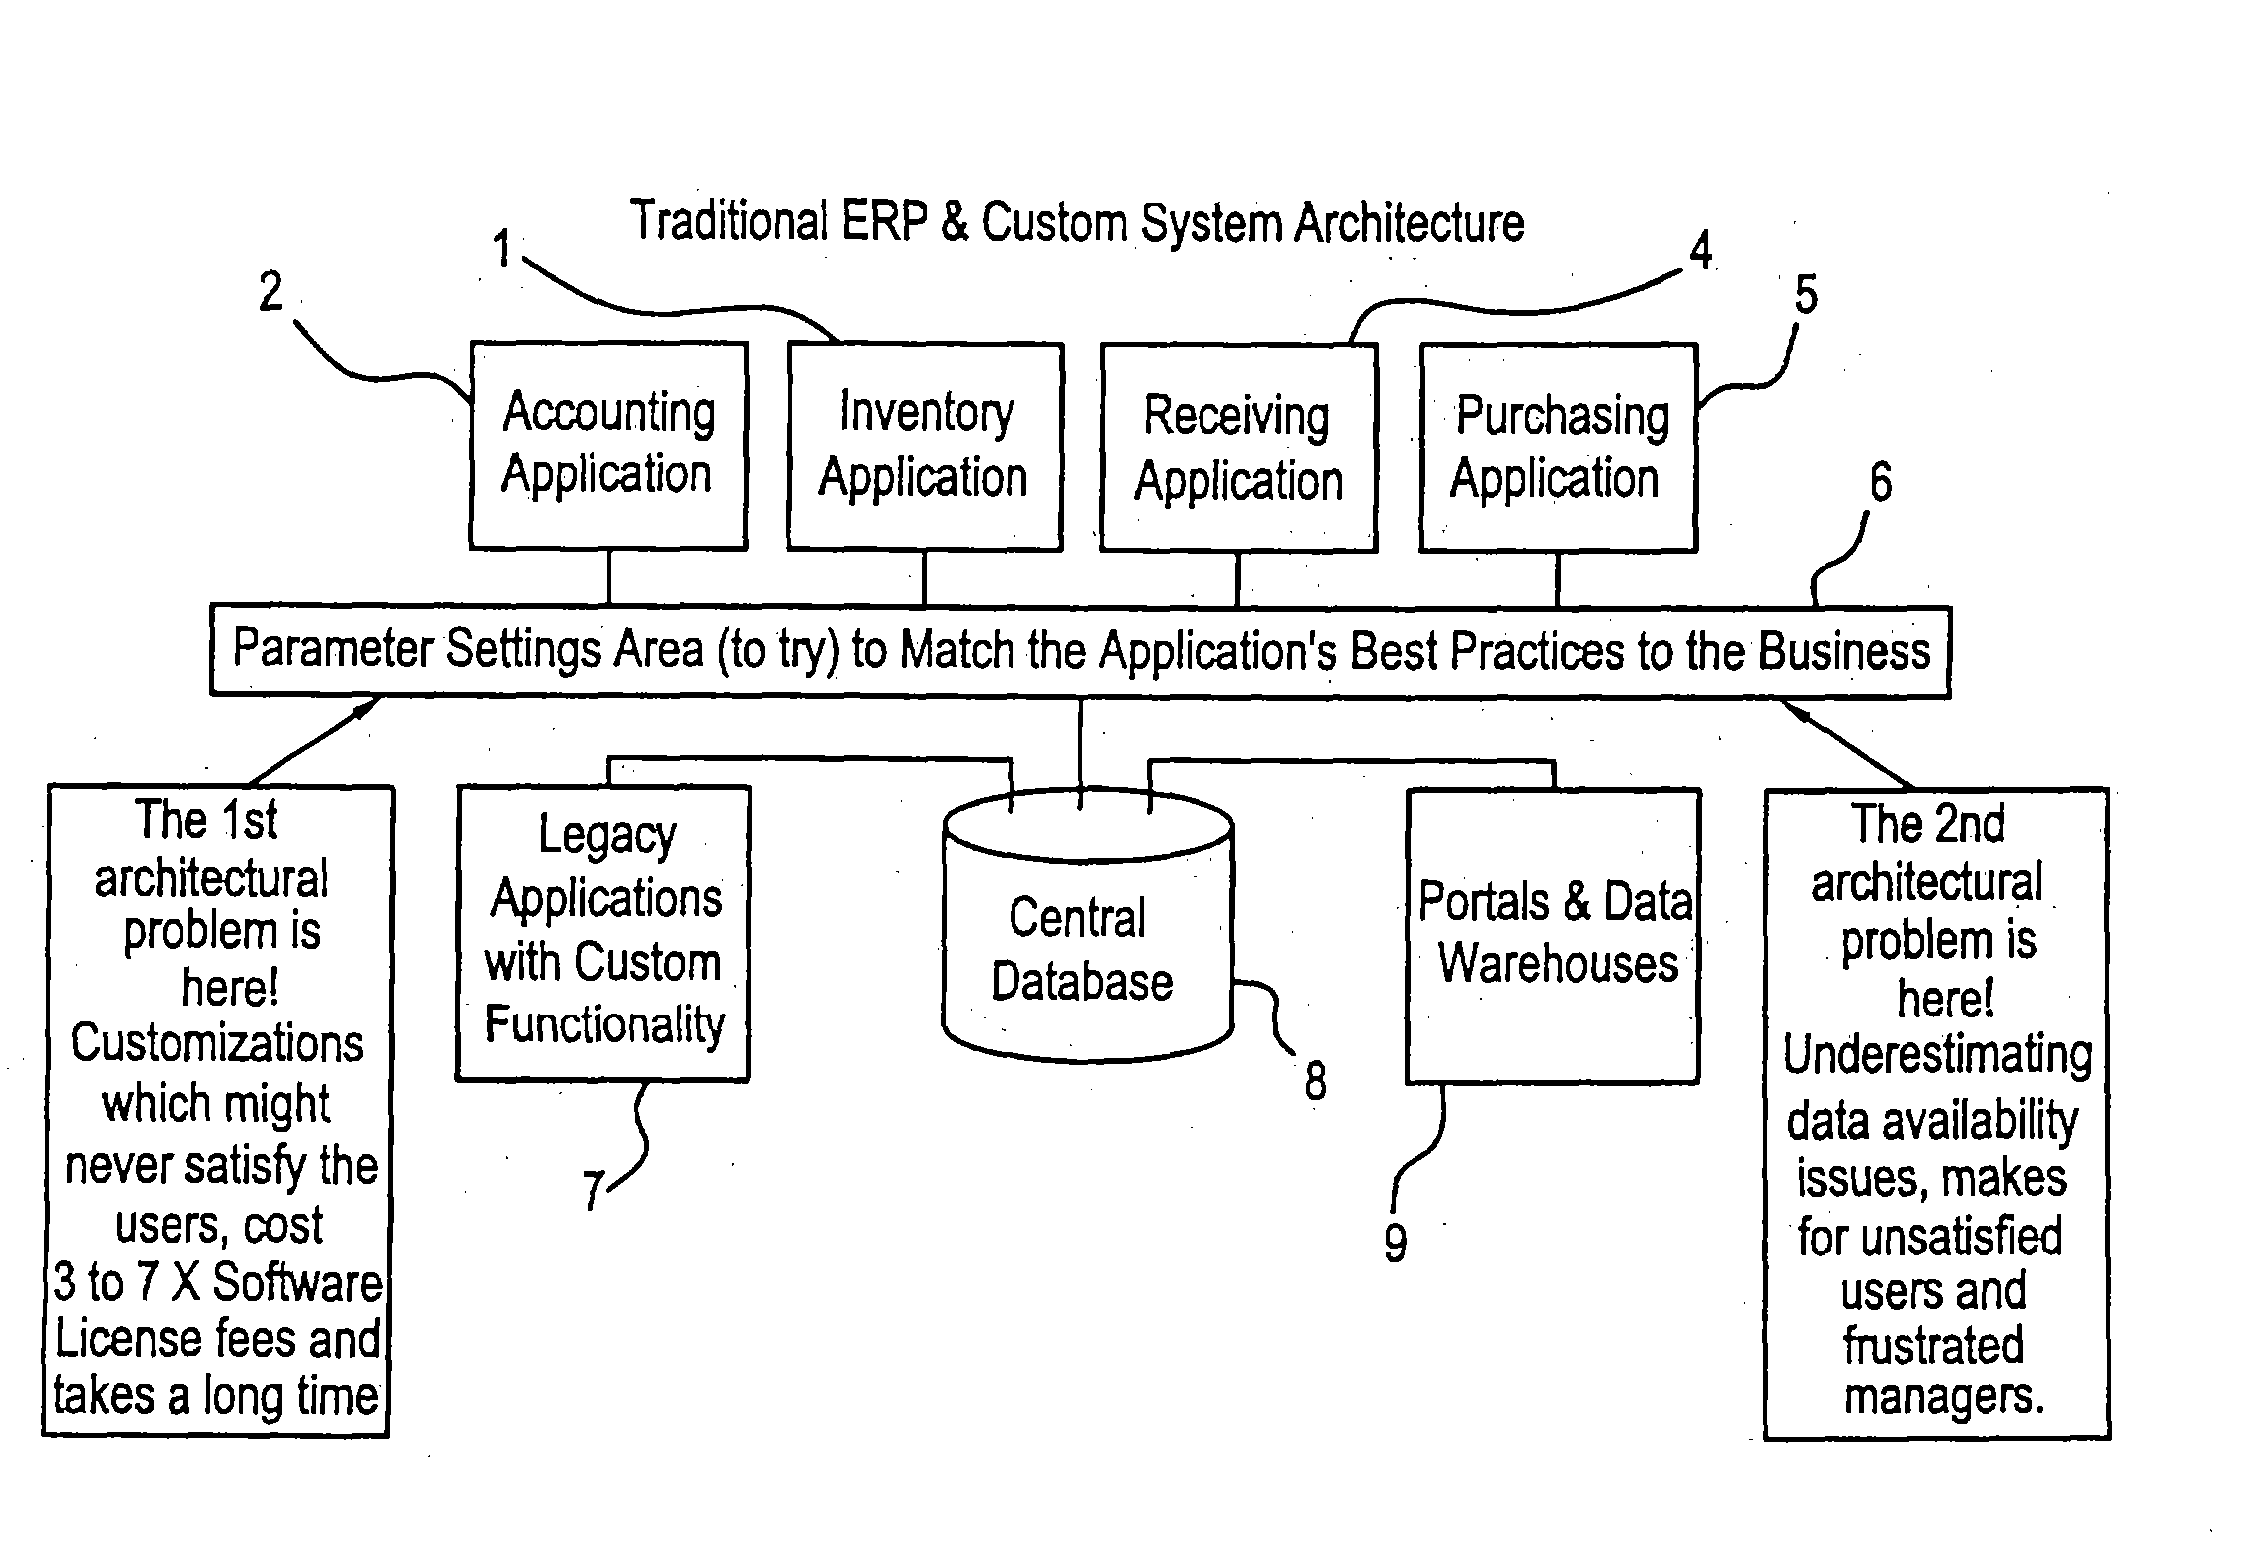 Information system comprised of synchronized software application moduless with individual databases for implementing and changing business requirements to be automated